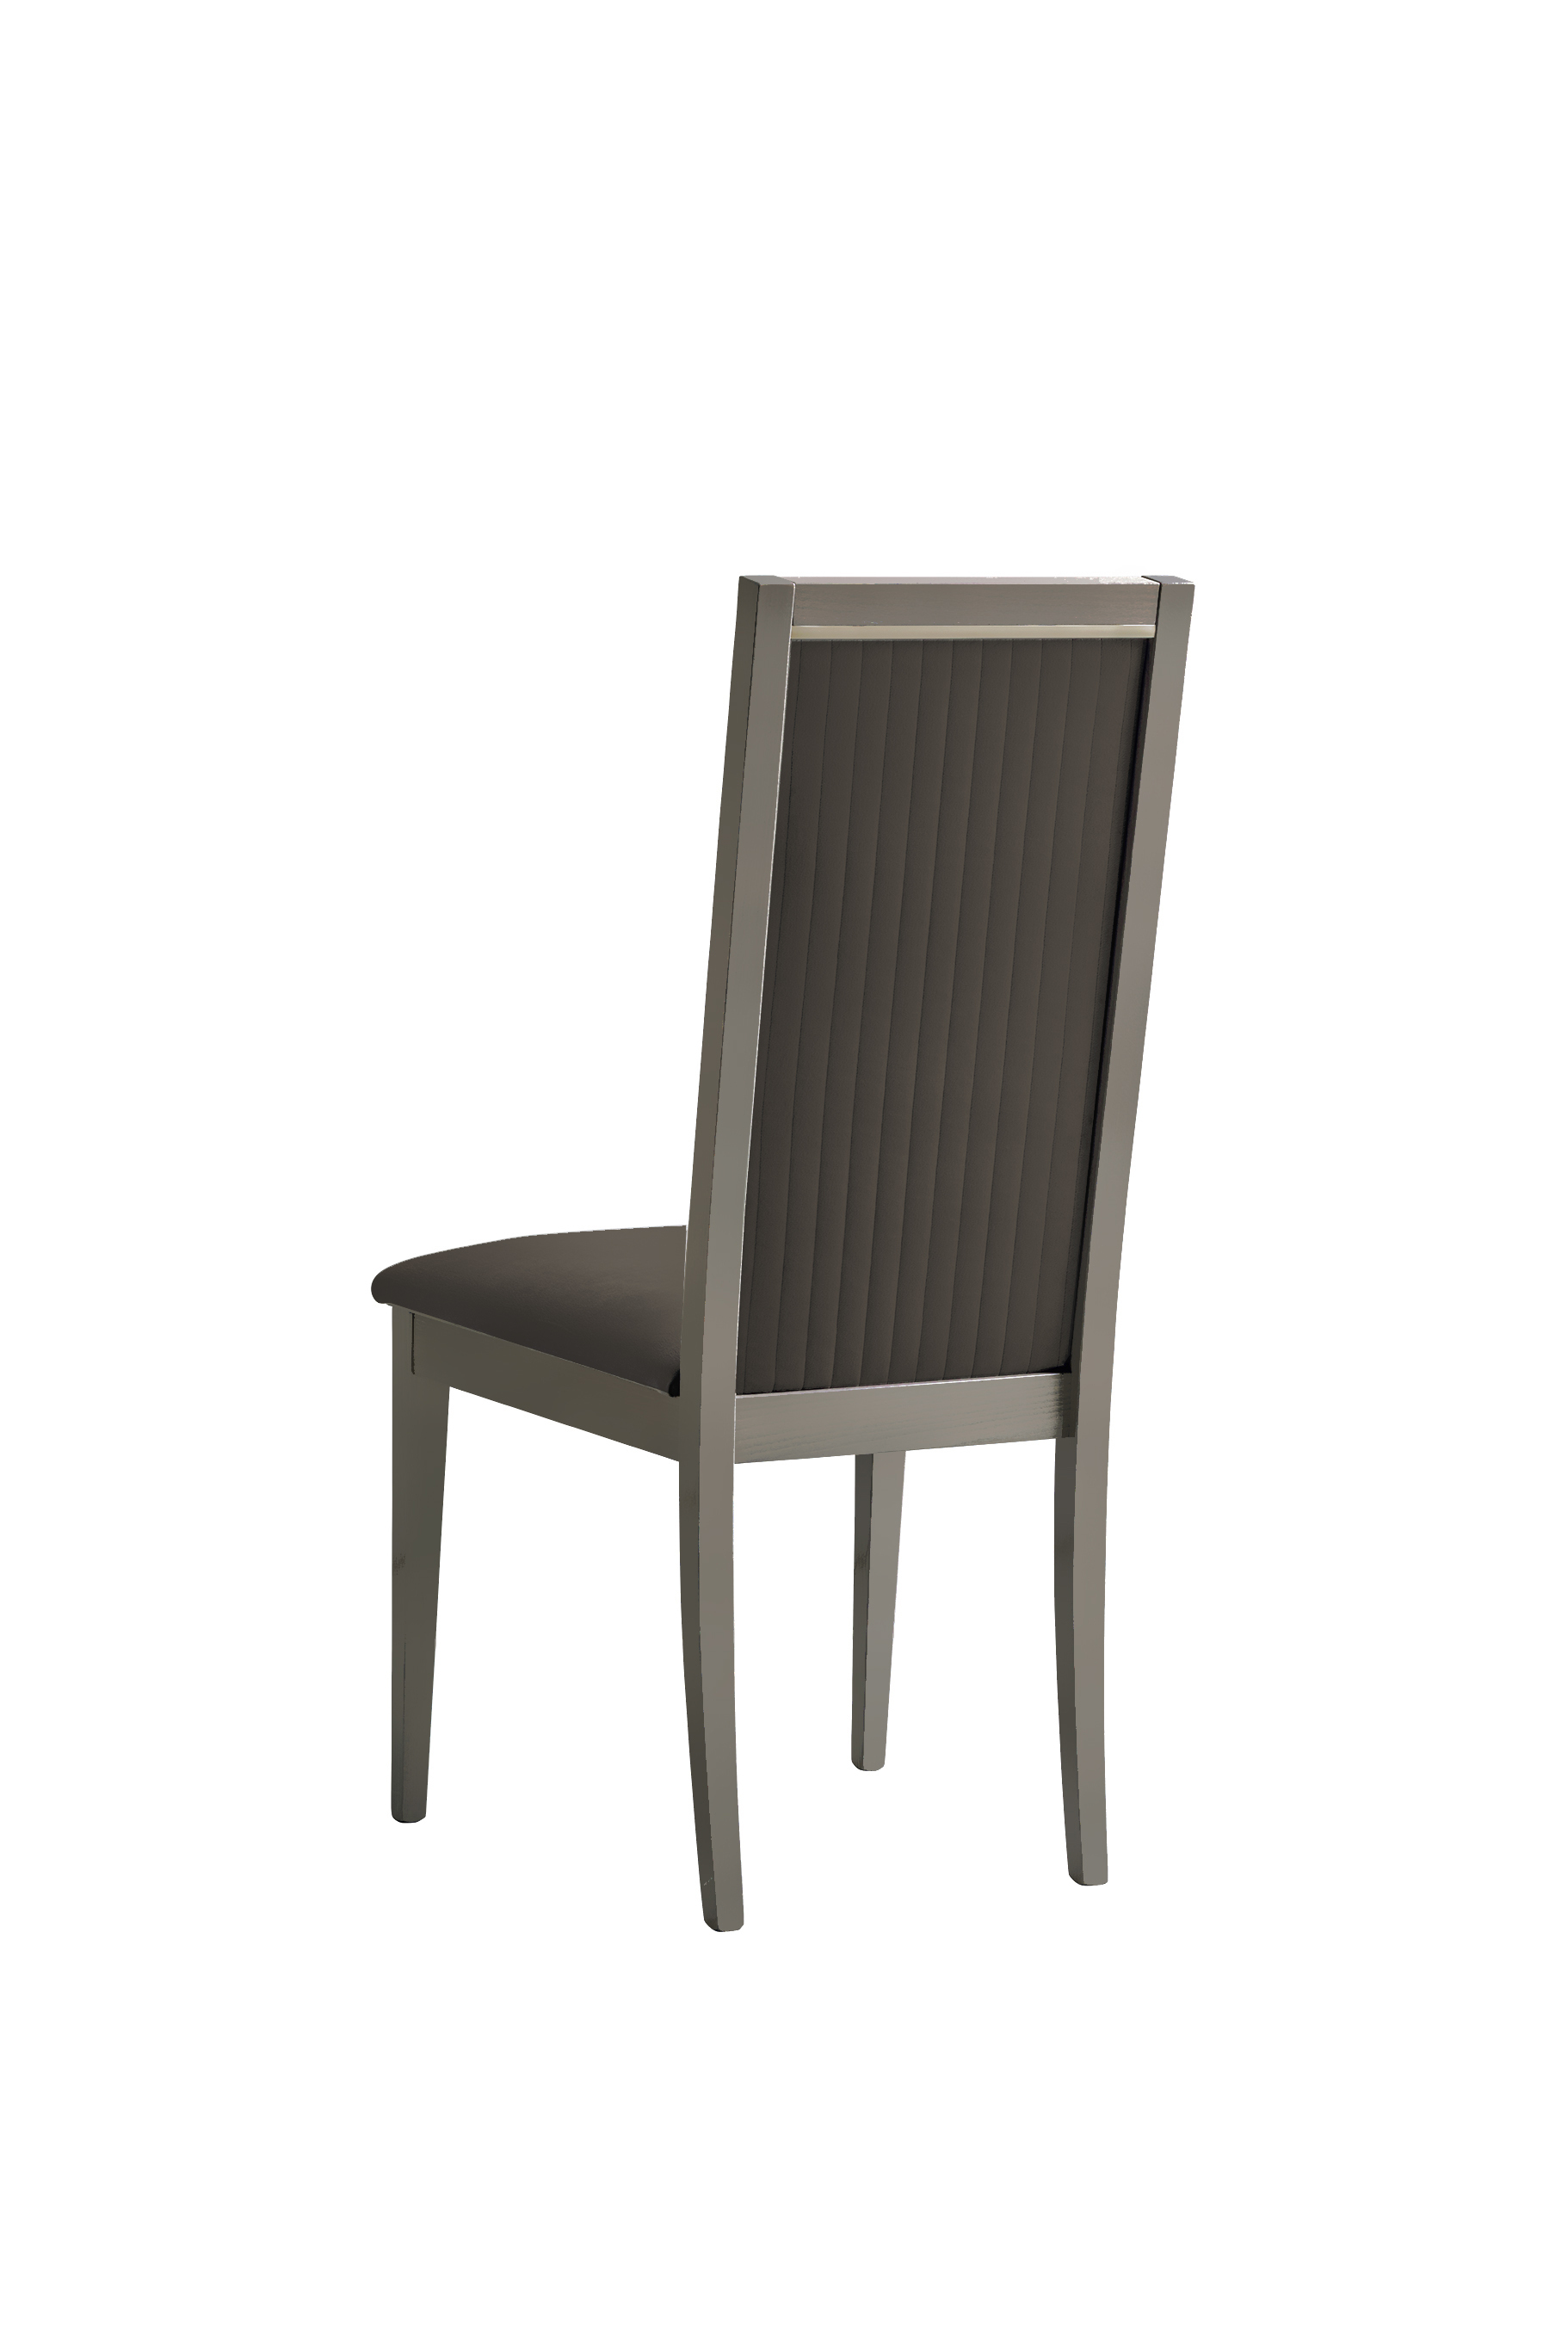 CHAIR ROMA STRIPE BACK time 800